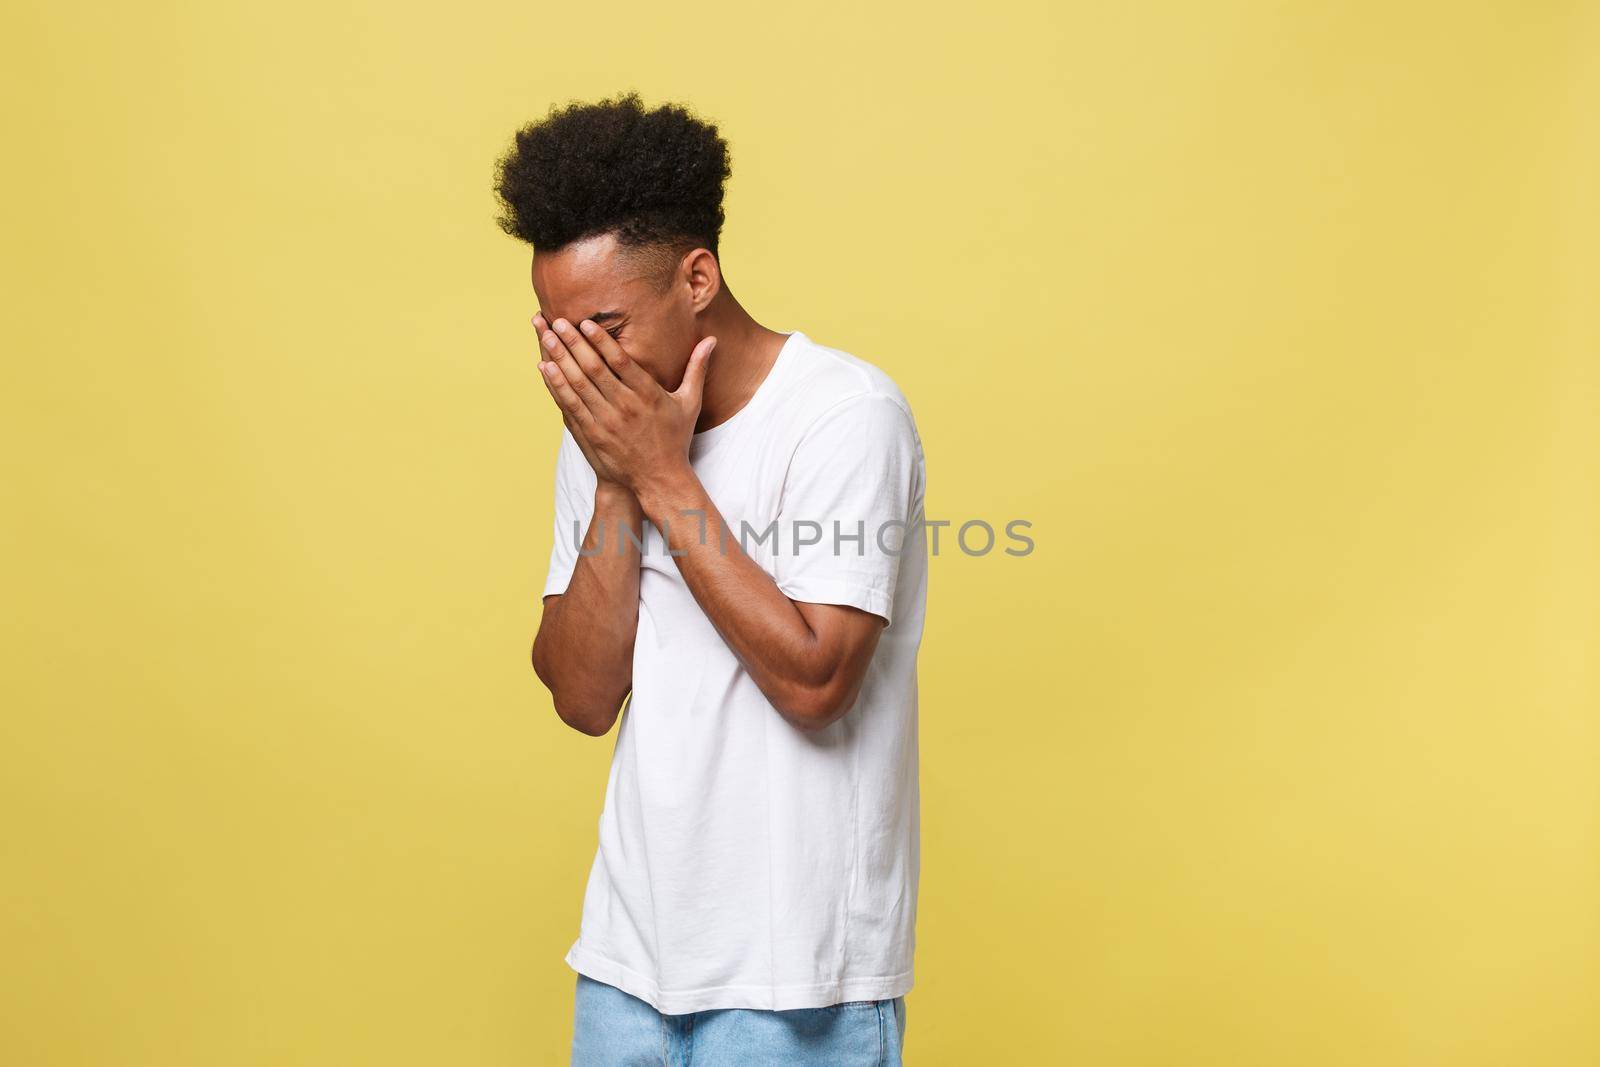 Closeup portrait man with sad expression, isolated on yellow wall background. Human emotions, body language, life perception. Duh moment